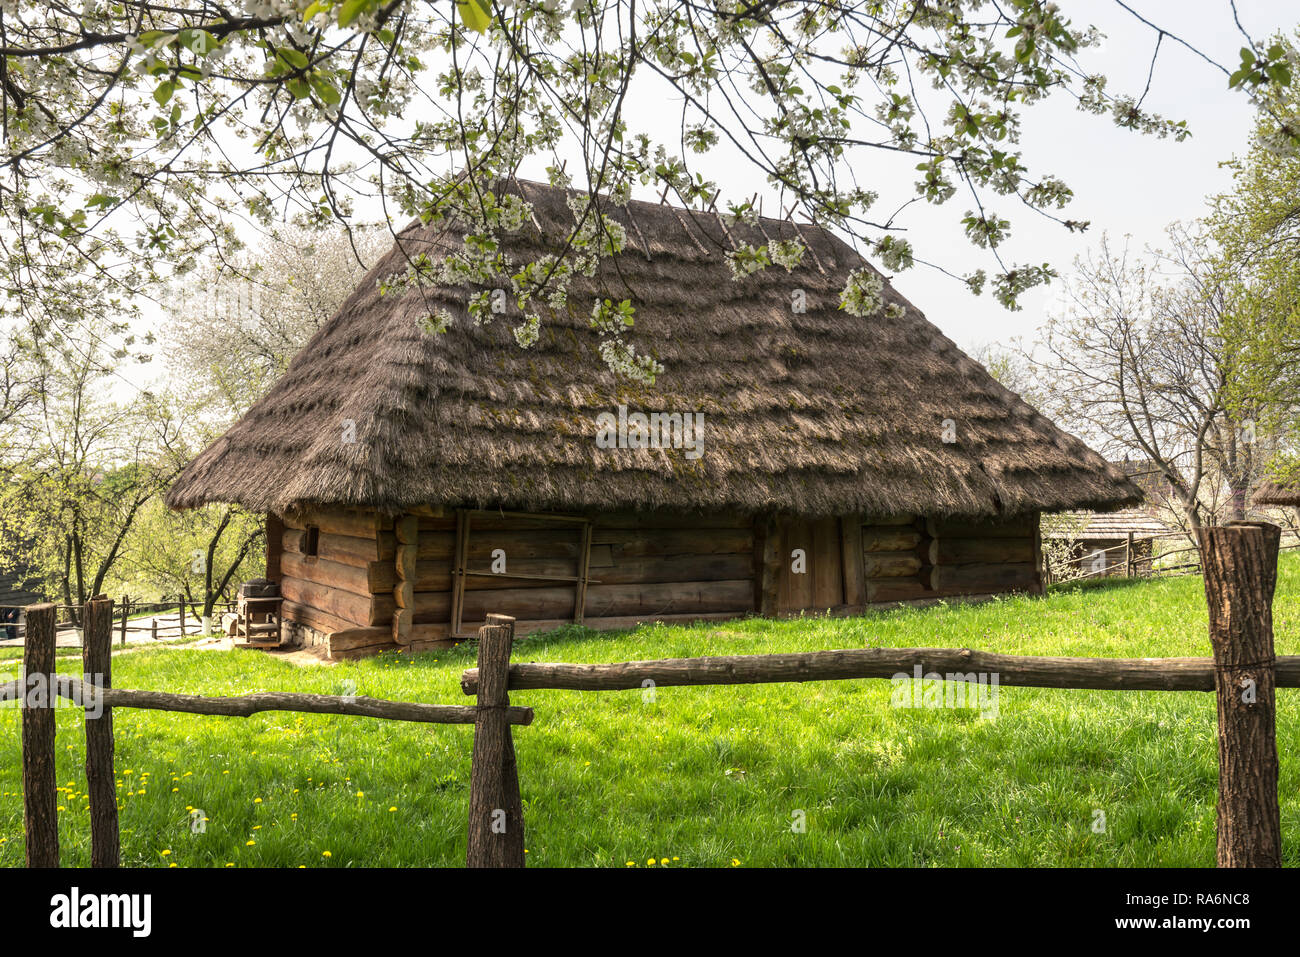 Old ukrainian house with straw roof and cherry tree flowers in spring time Stock Photo